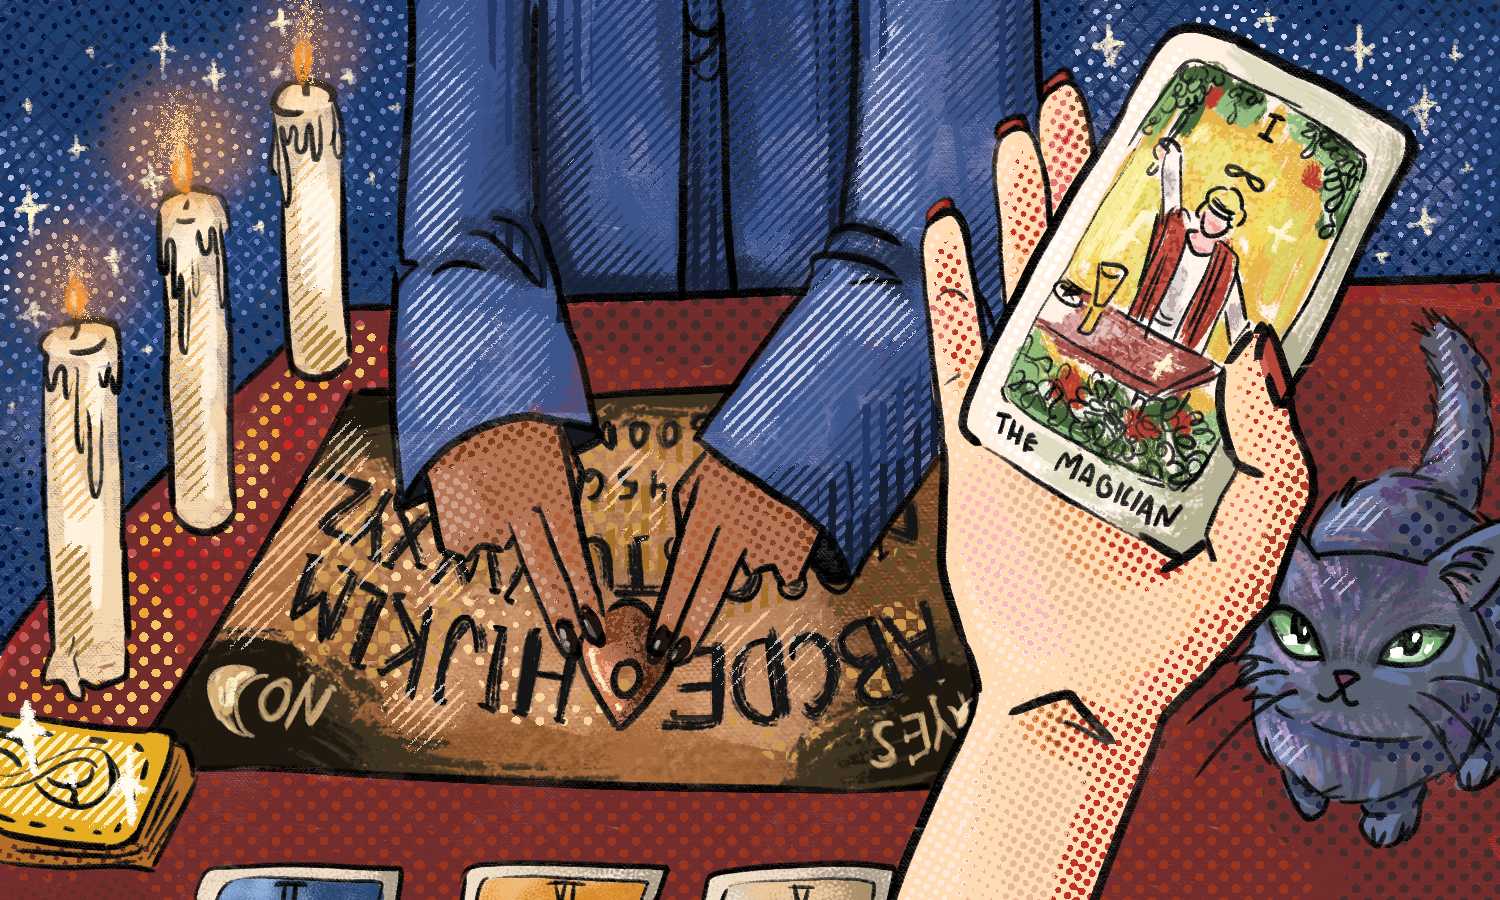 Graphic illustration depicting a hand holding a taro card titled "The Magician" with a ouija board, candles, and a black cat in the background.